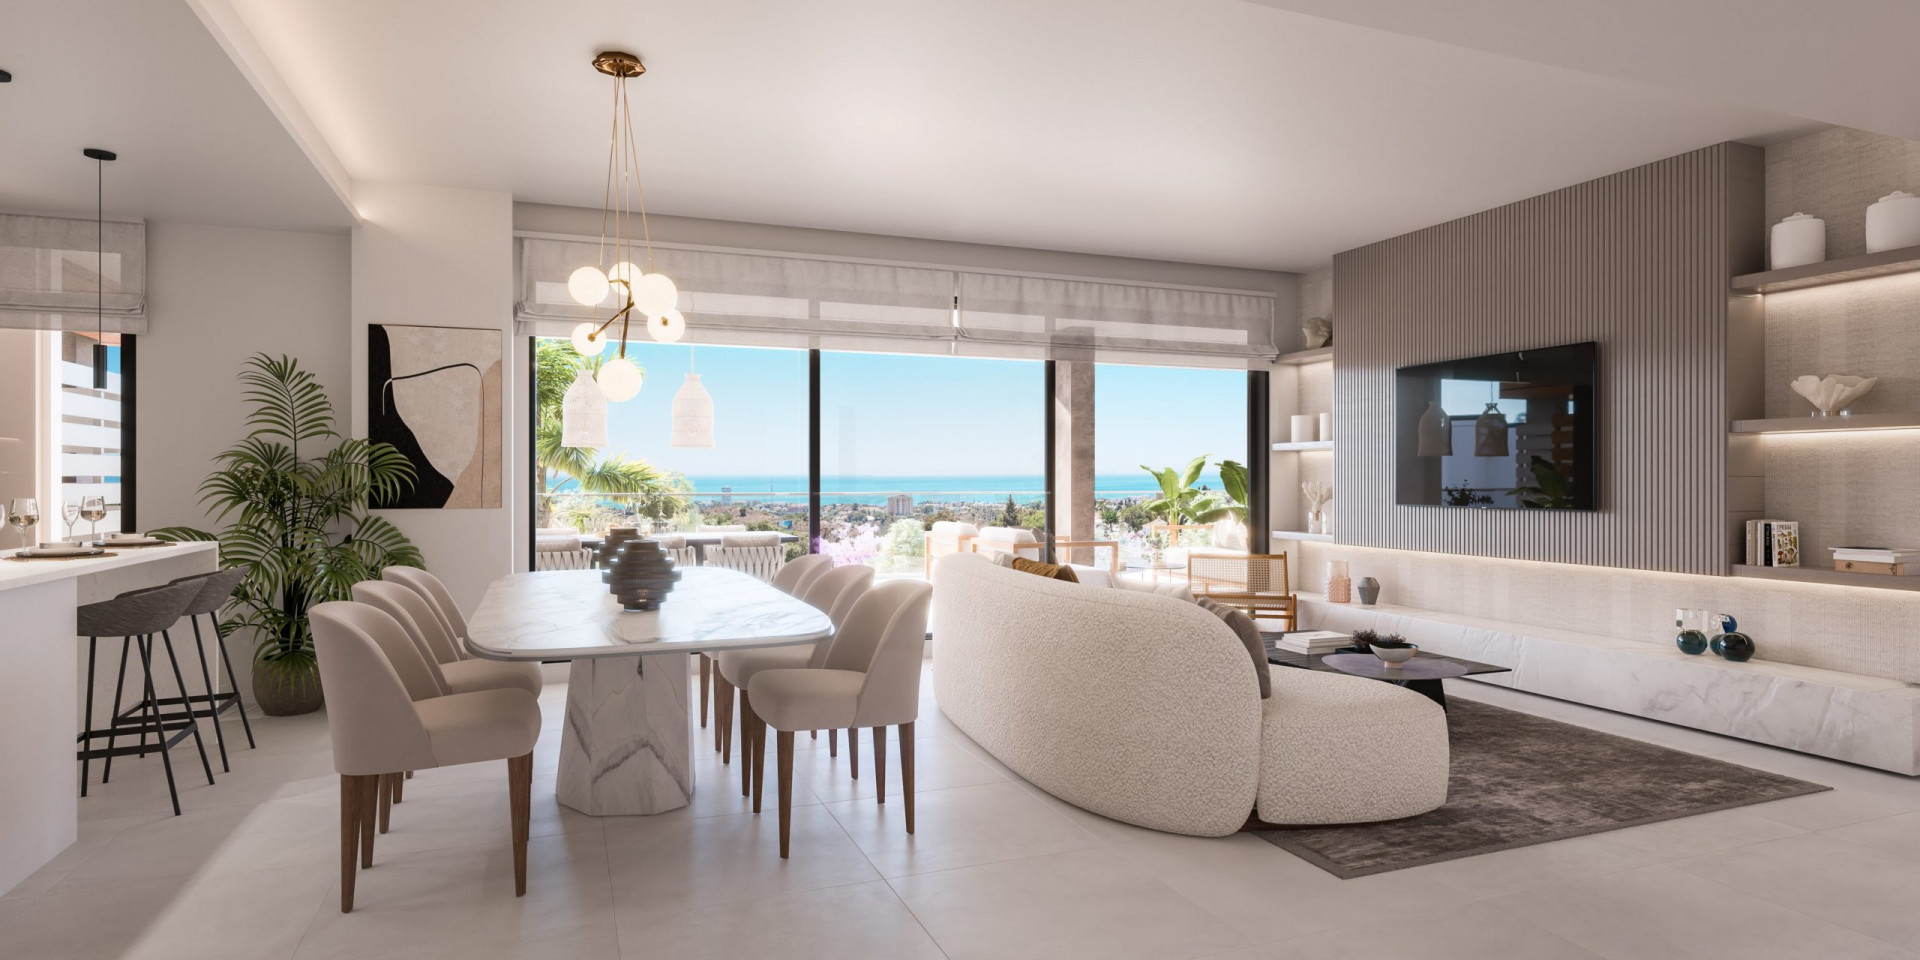 Quintessence: New residential project of 96 flats and penthouses located east of Marbella. | Image 4